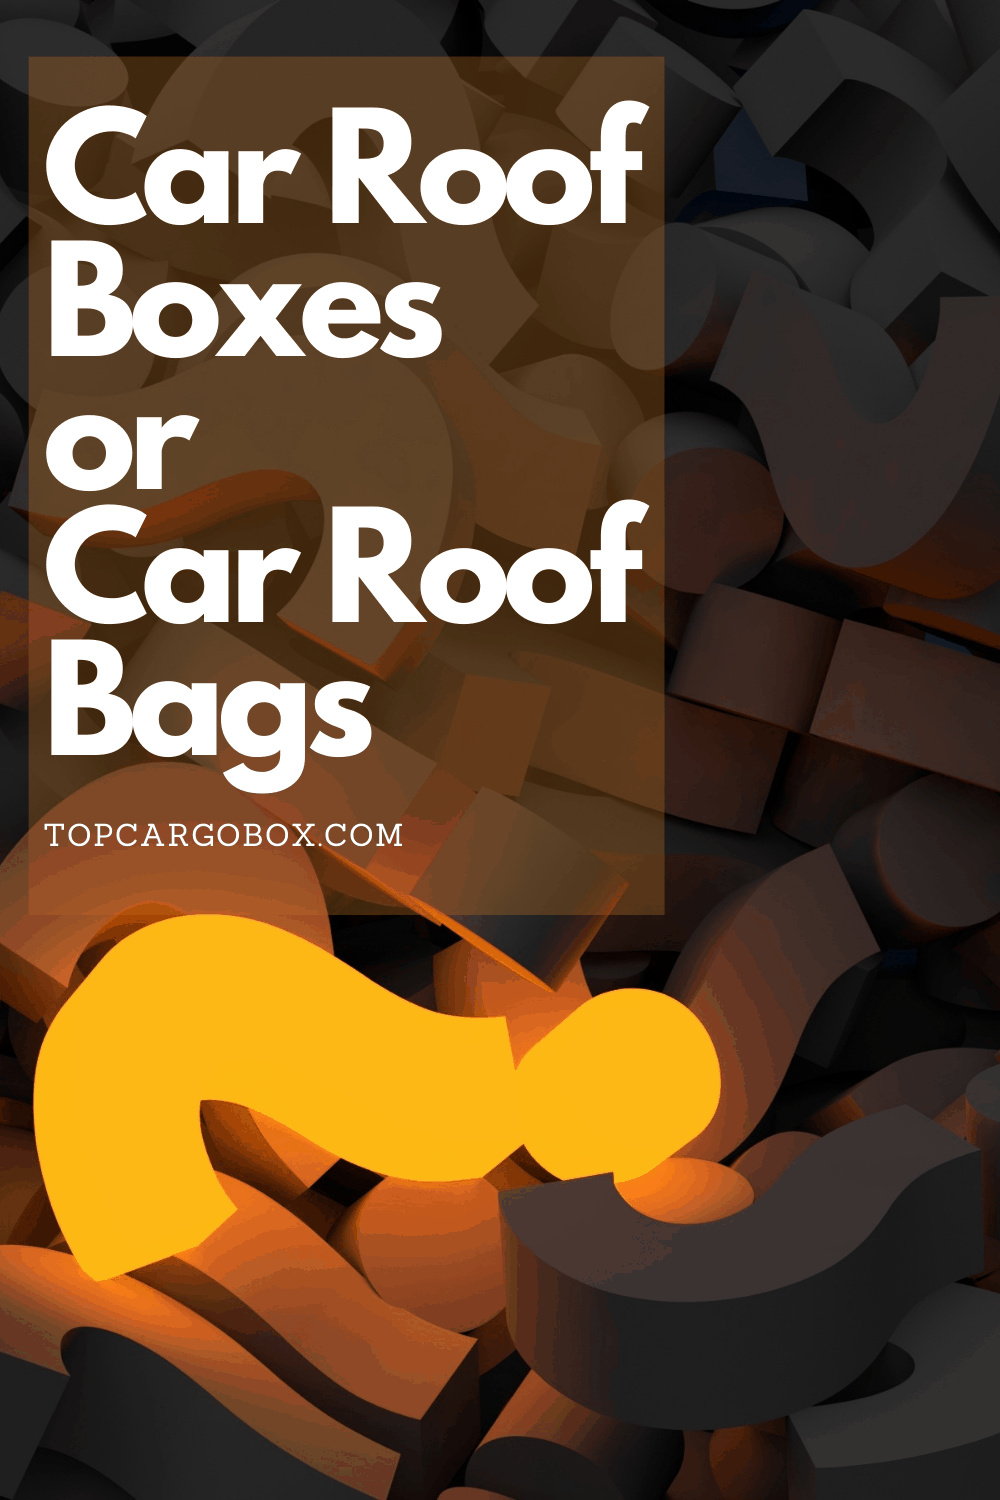 choosing car roof boxes or car roof bags is a tough question to answer.